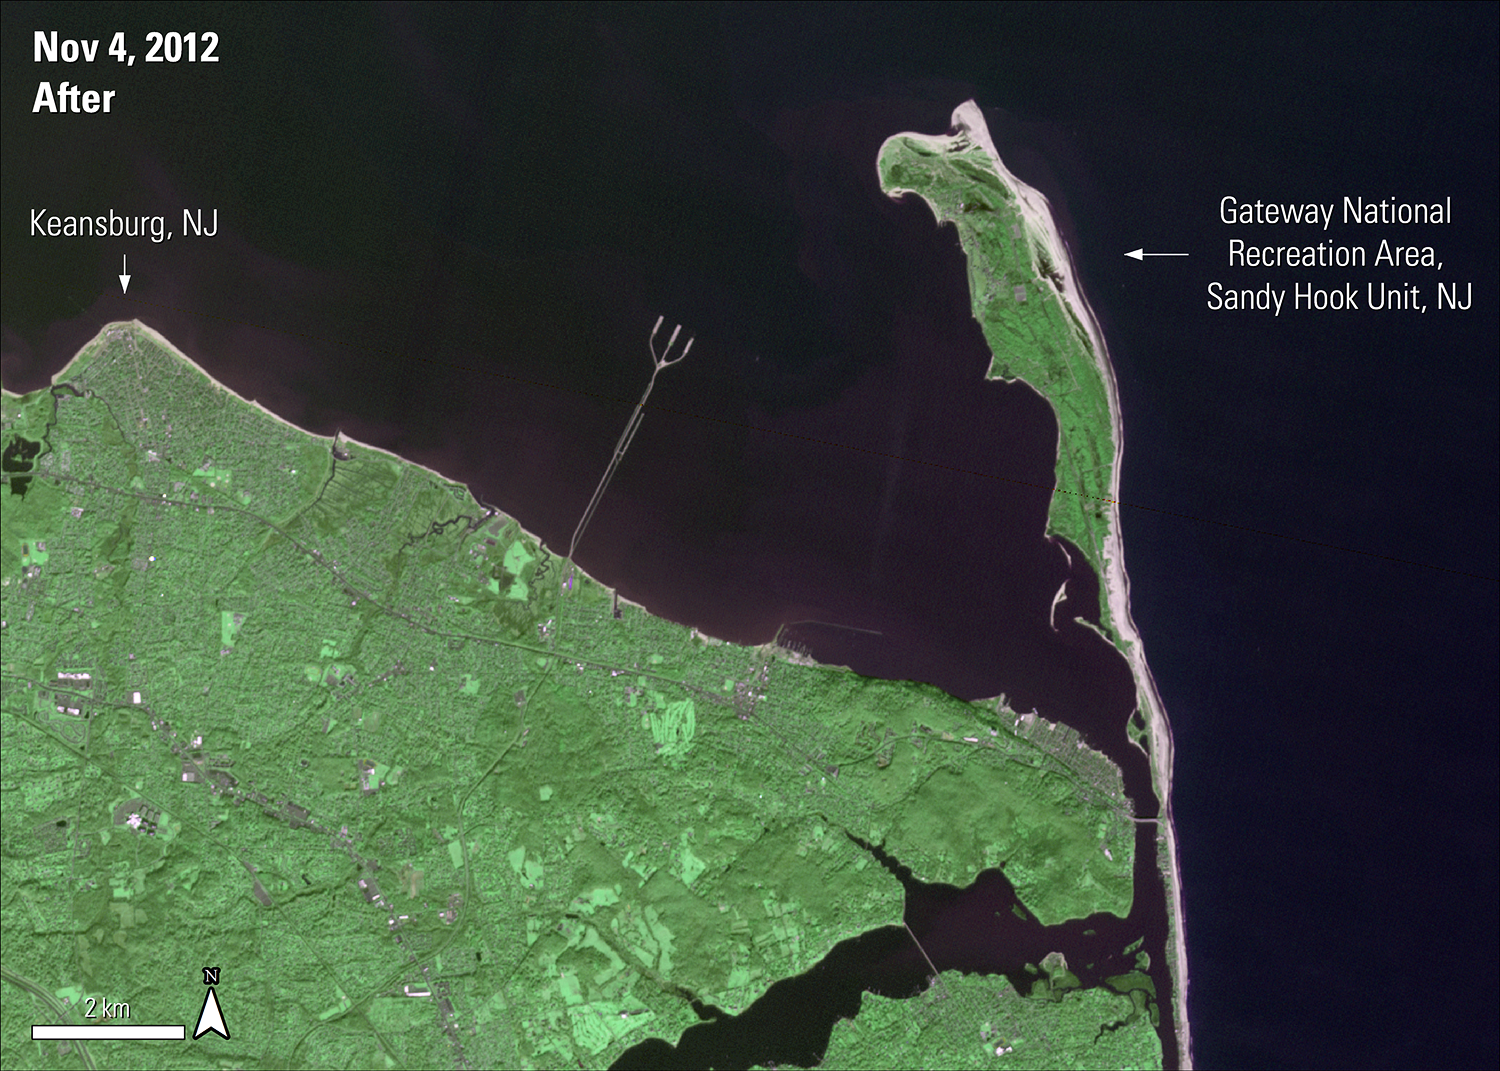 Terra ASTER surface reflectance imagery over part of New Jersey after Hurricane Sandy, acquired November 4, 2012.